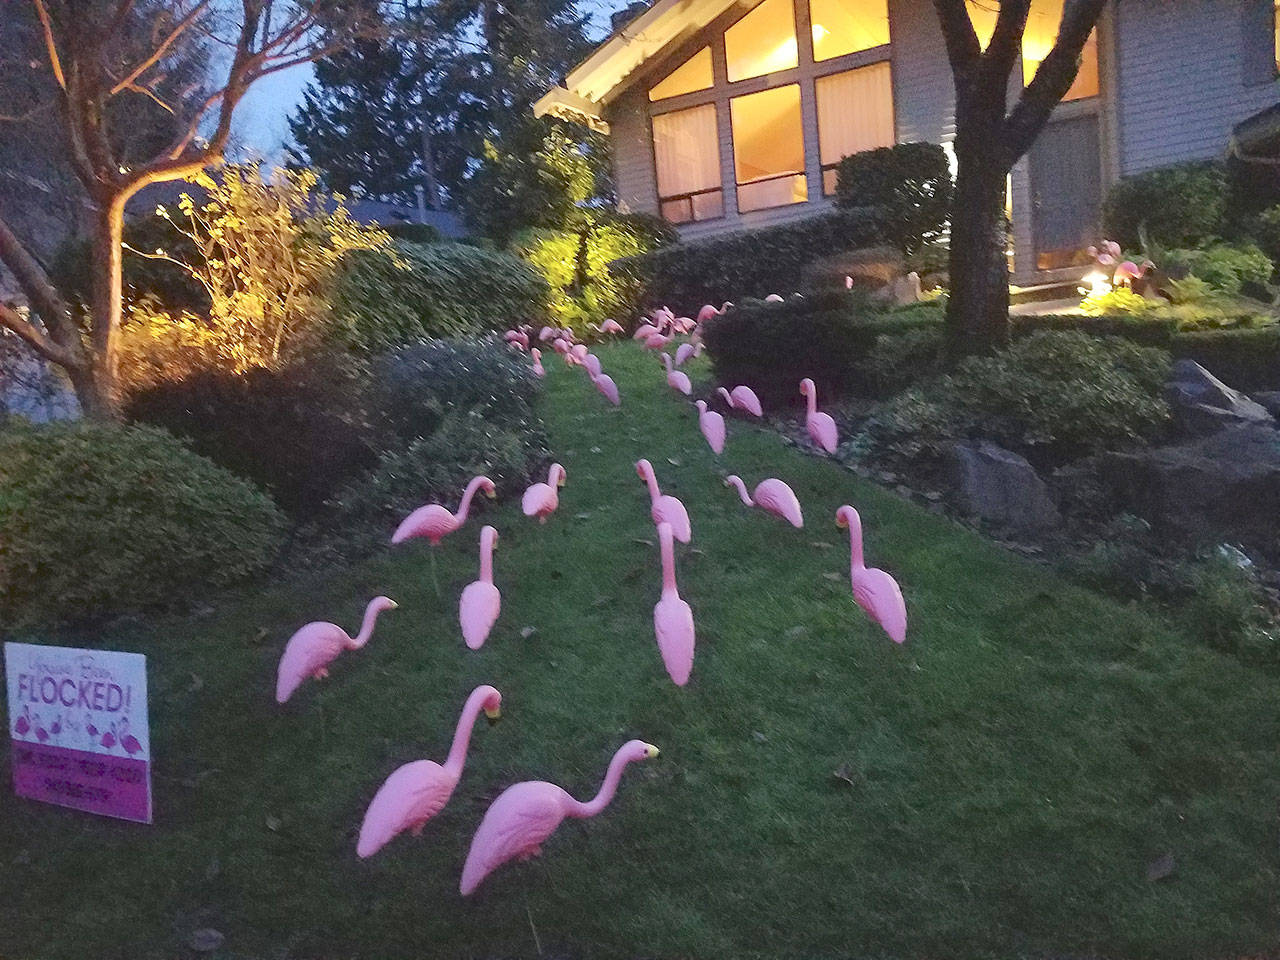 One of their many fundraising projects included flocking yards with decorative flamingos throughout Kirkland neighborhoods. Photo courtesy of Katrina Wood